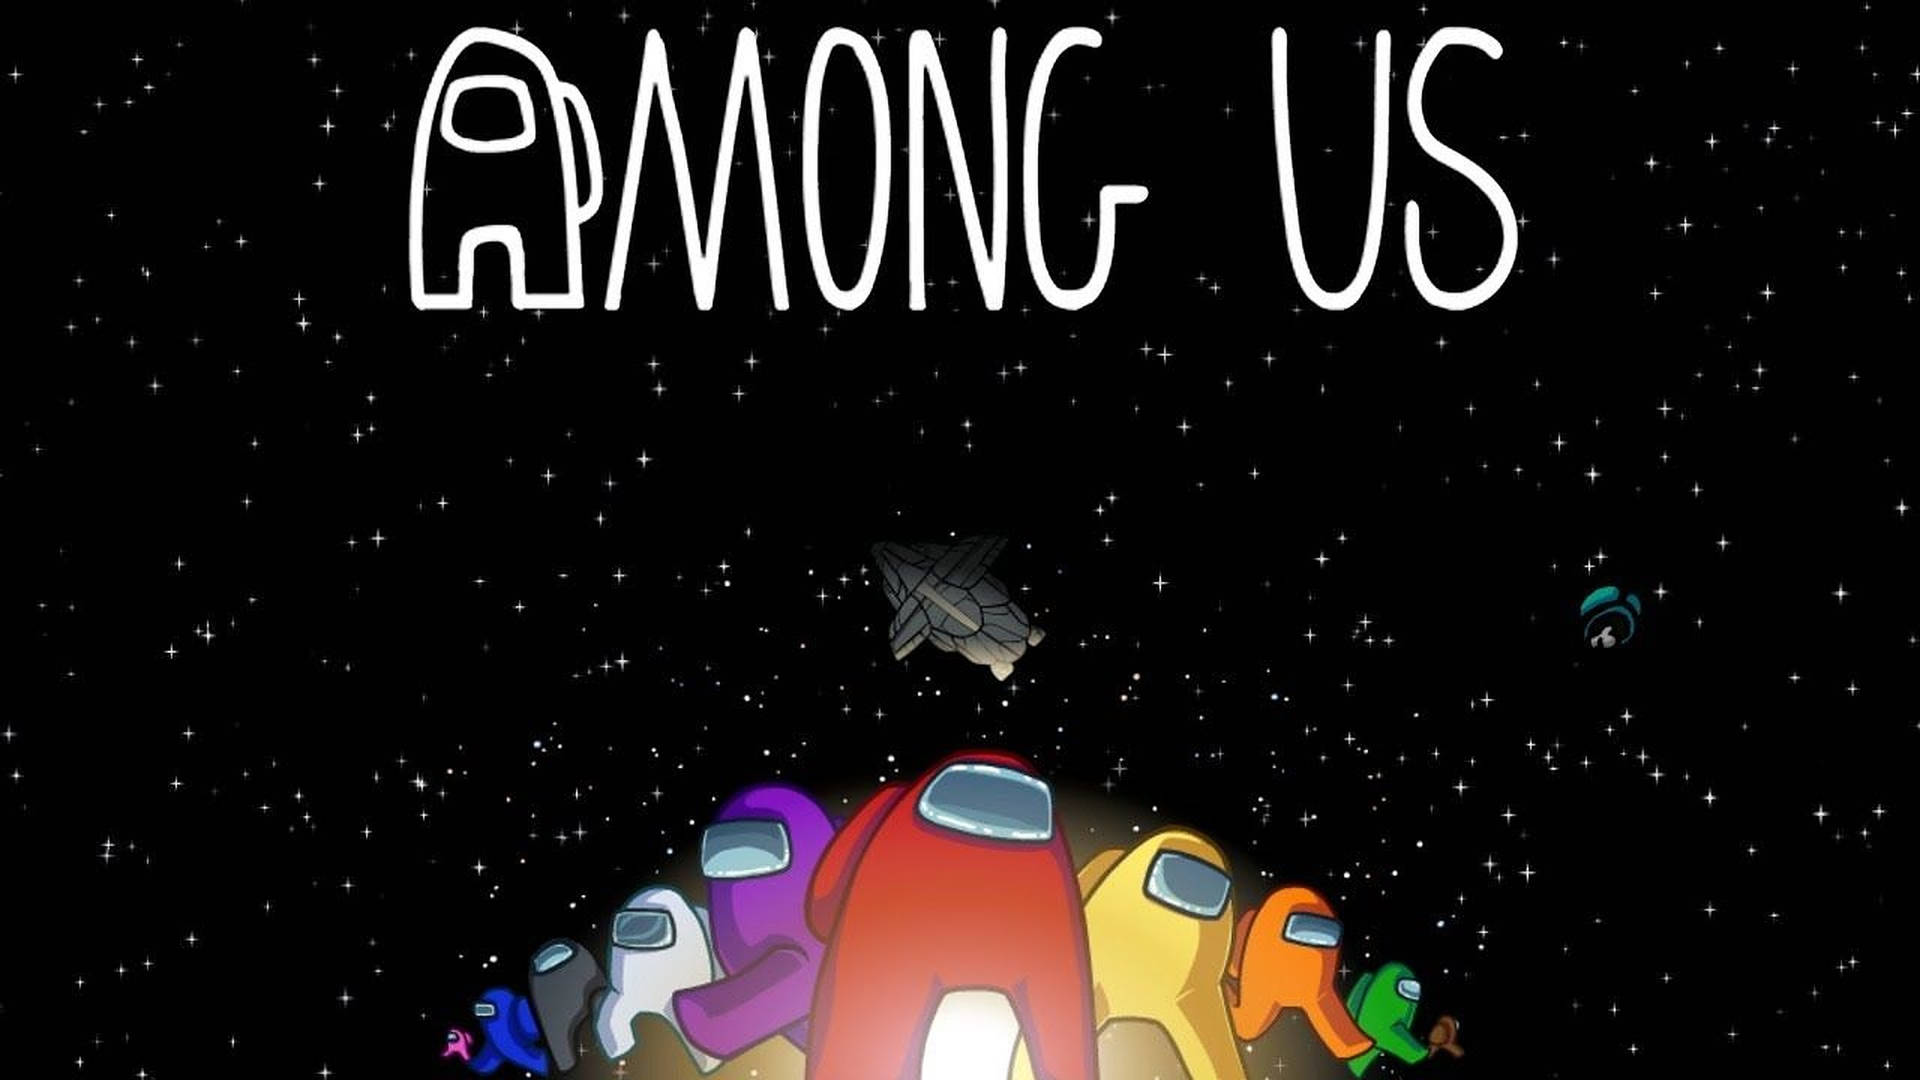 Among Us Space Poster Background